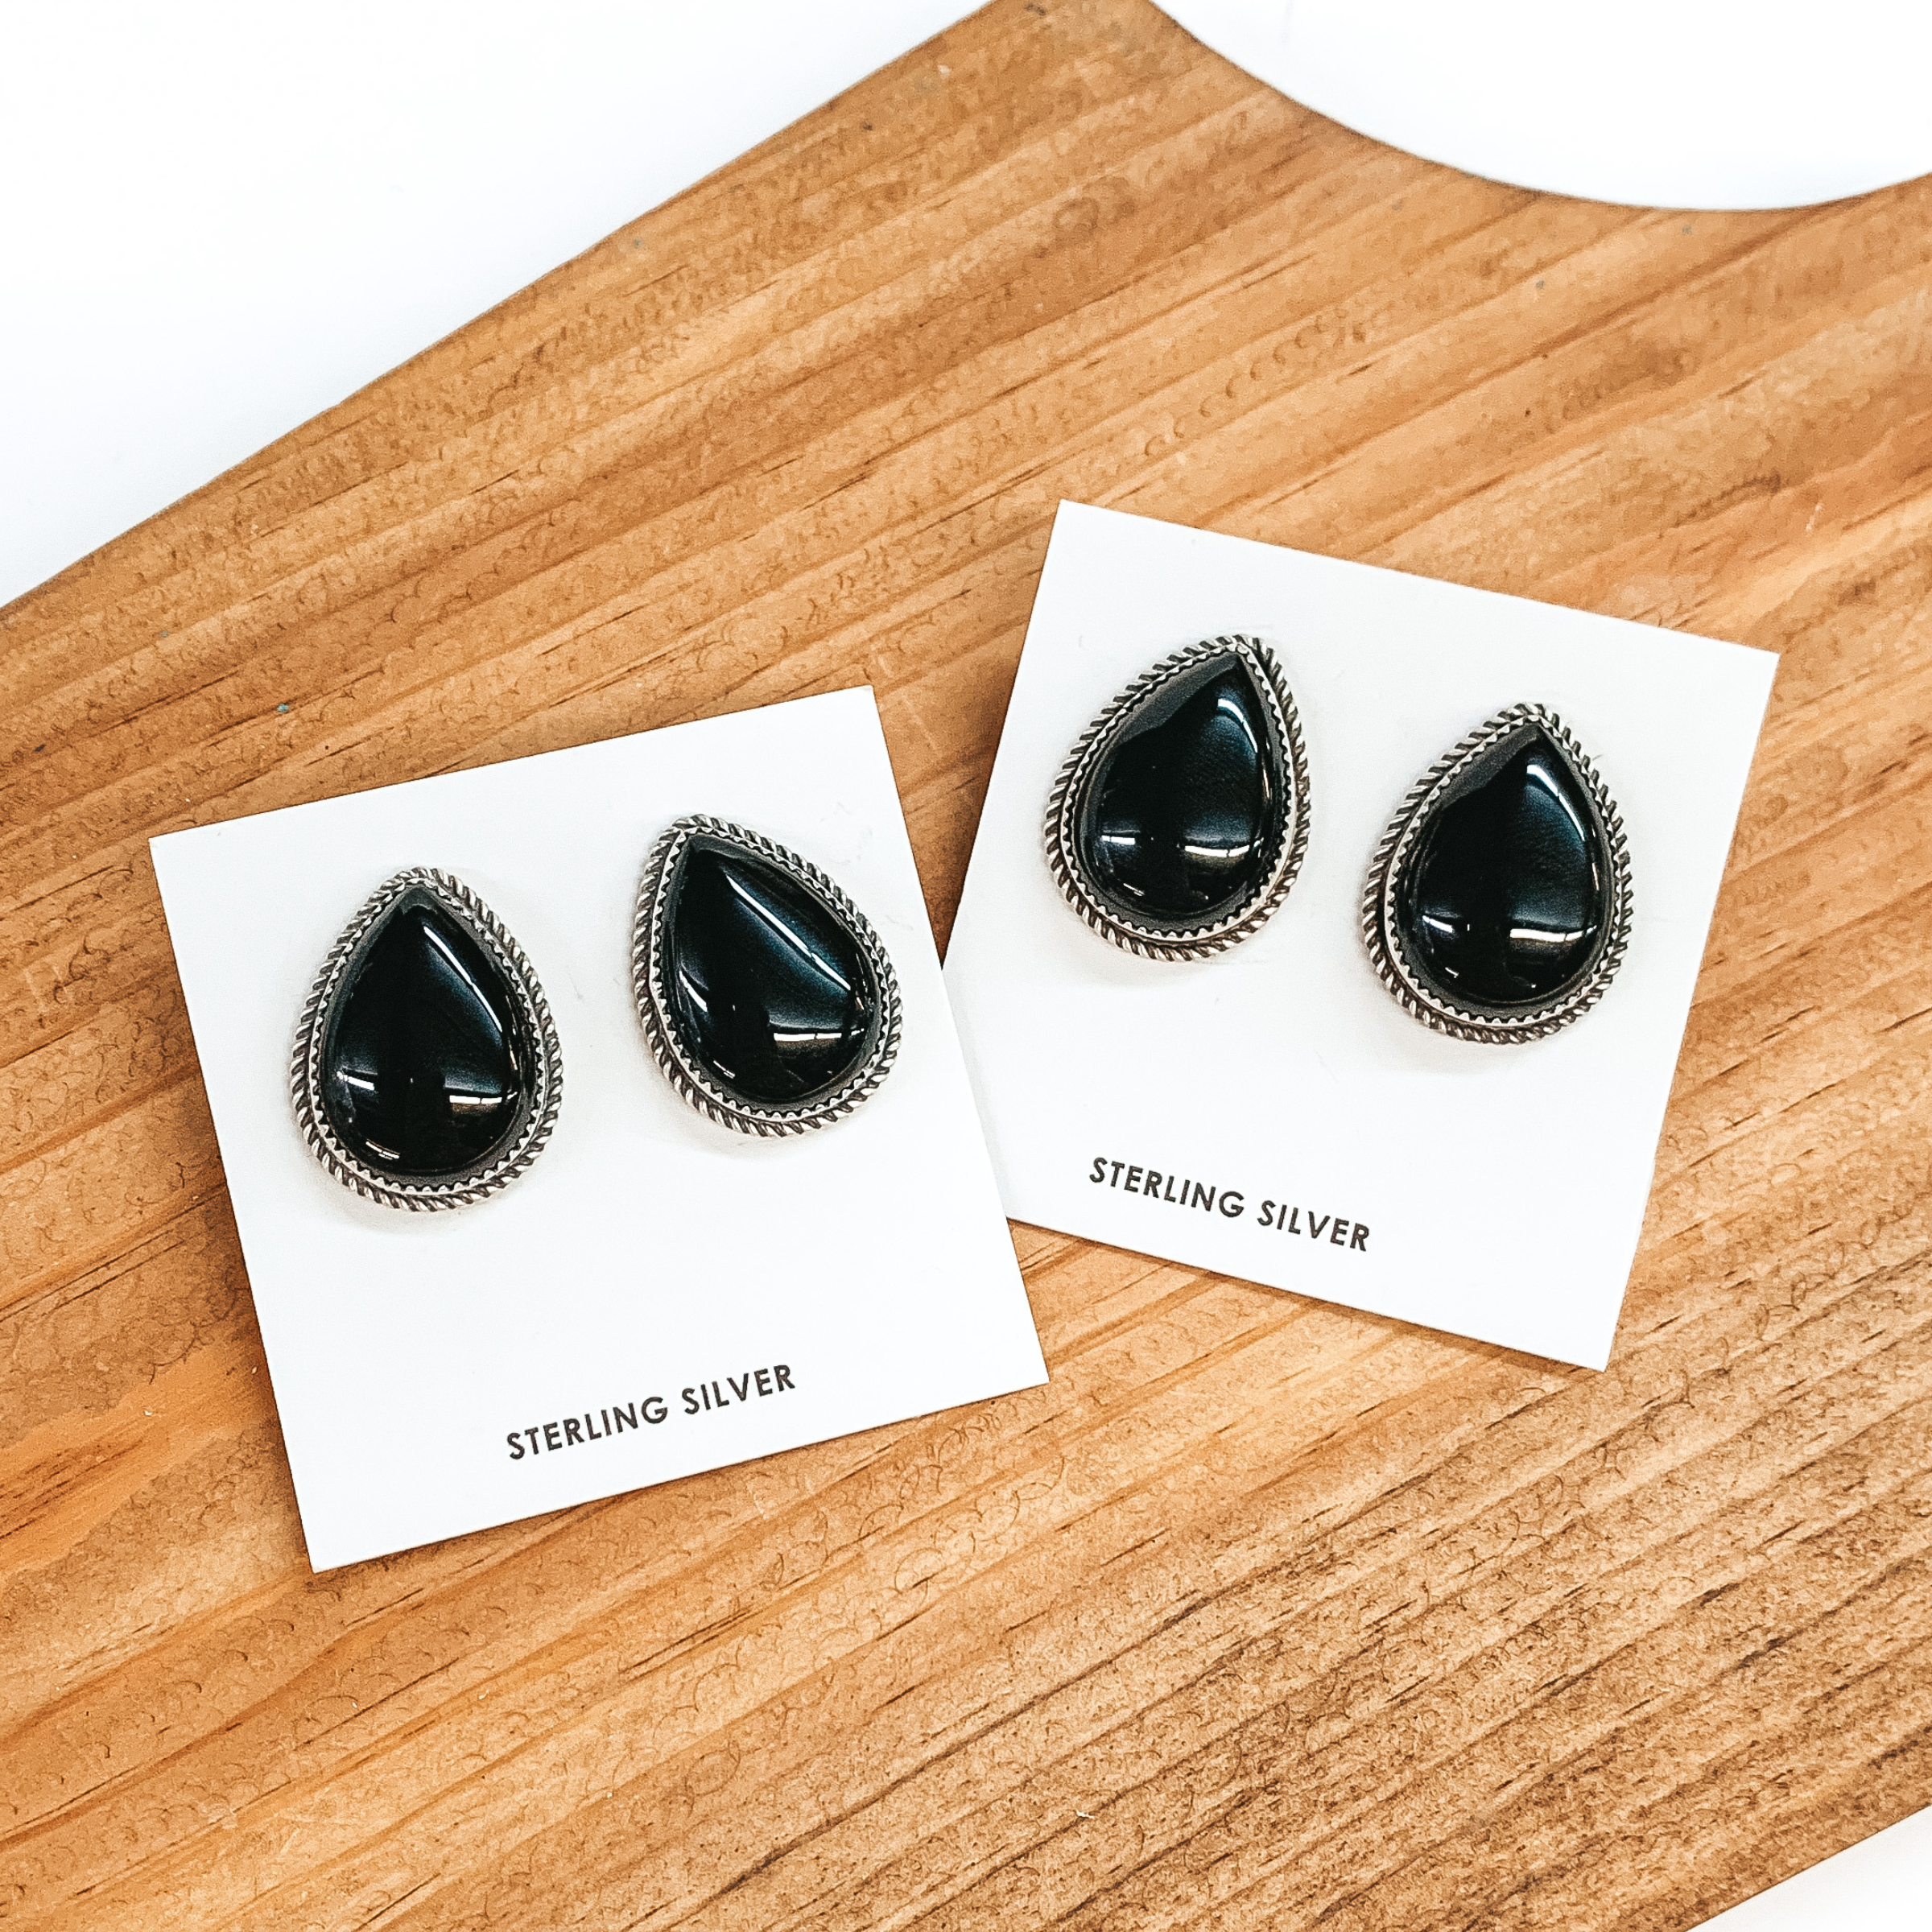 Two pairs of teardrop stud earrings that include a silver backing and black onyx stones. These earrings are pictured on a brown block on a white background. 